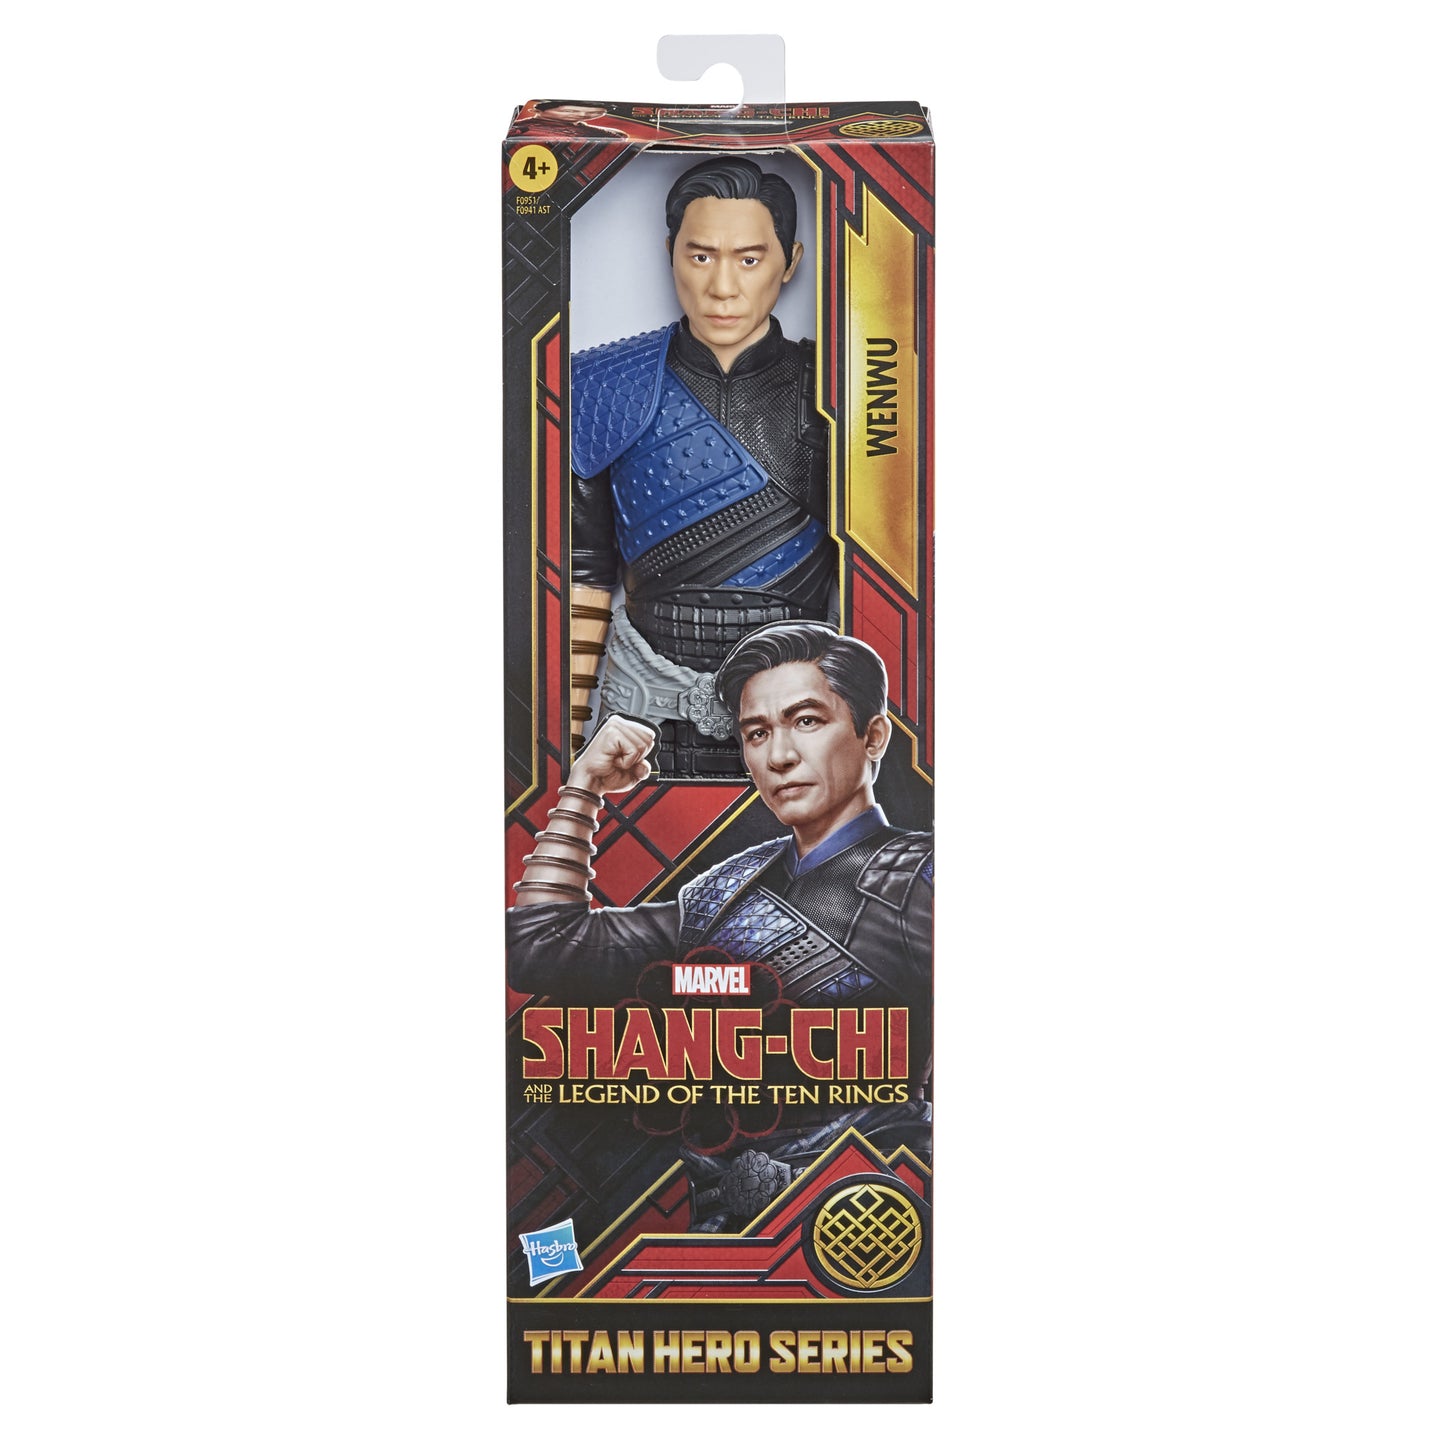 Titan Hero Series: Shang-Chi and the Legend of the Ten Rings - Wenwu 12" Action Figure